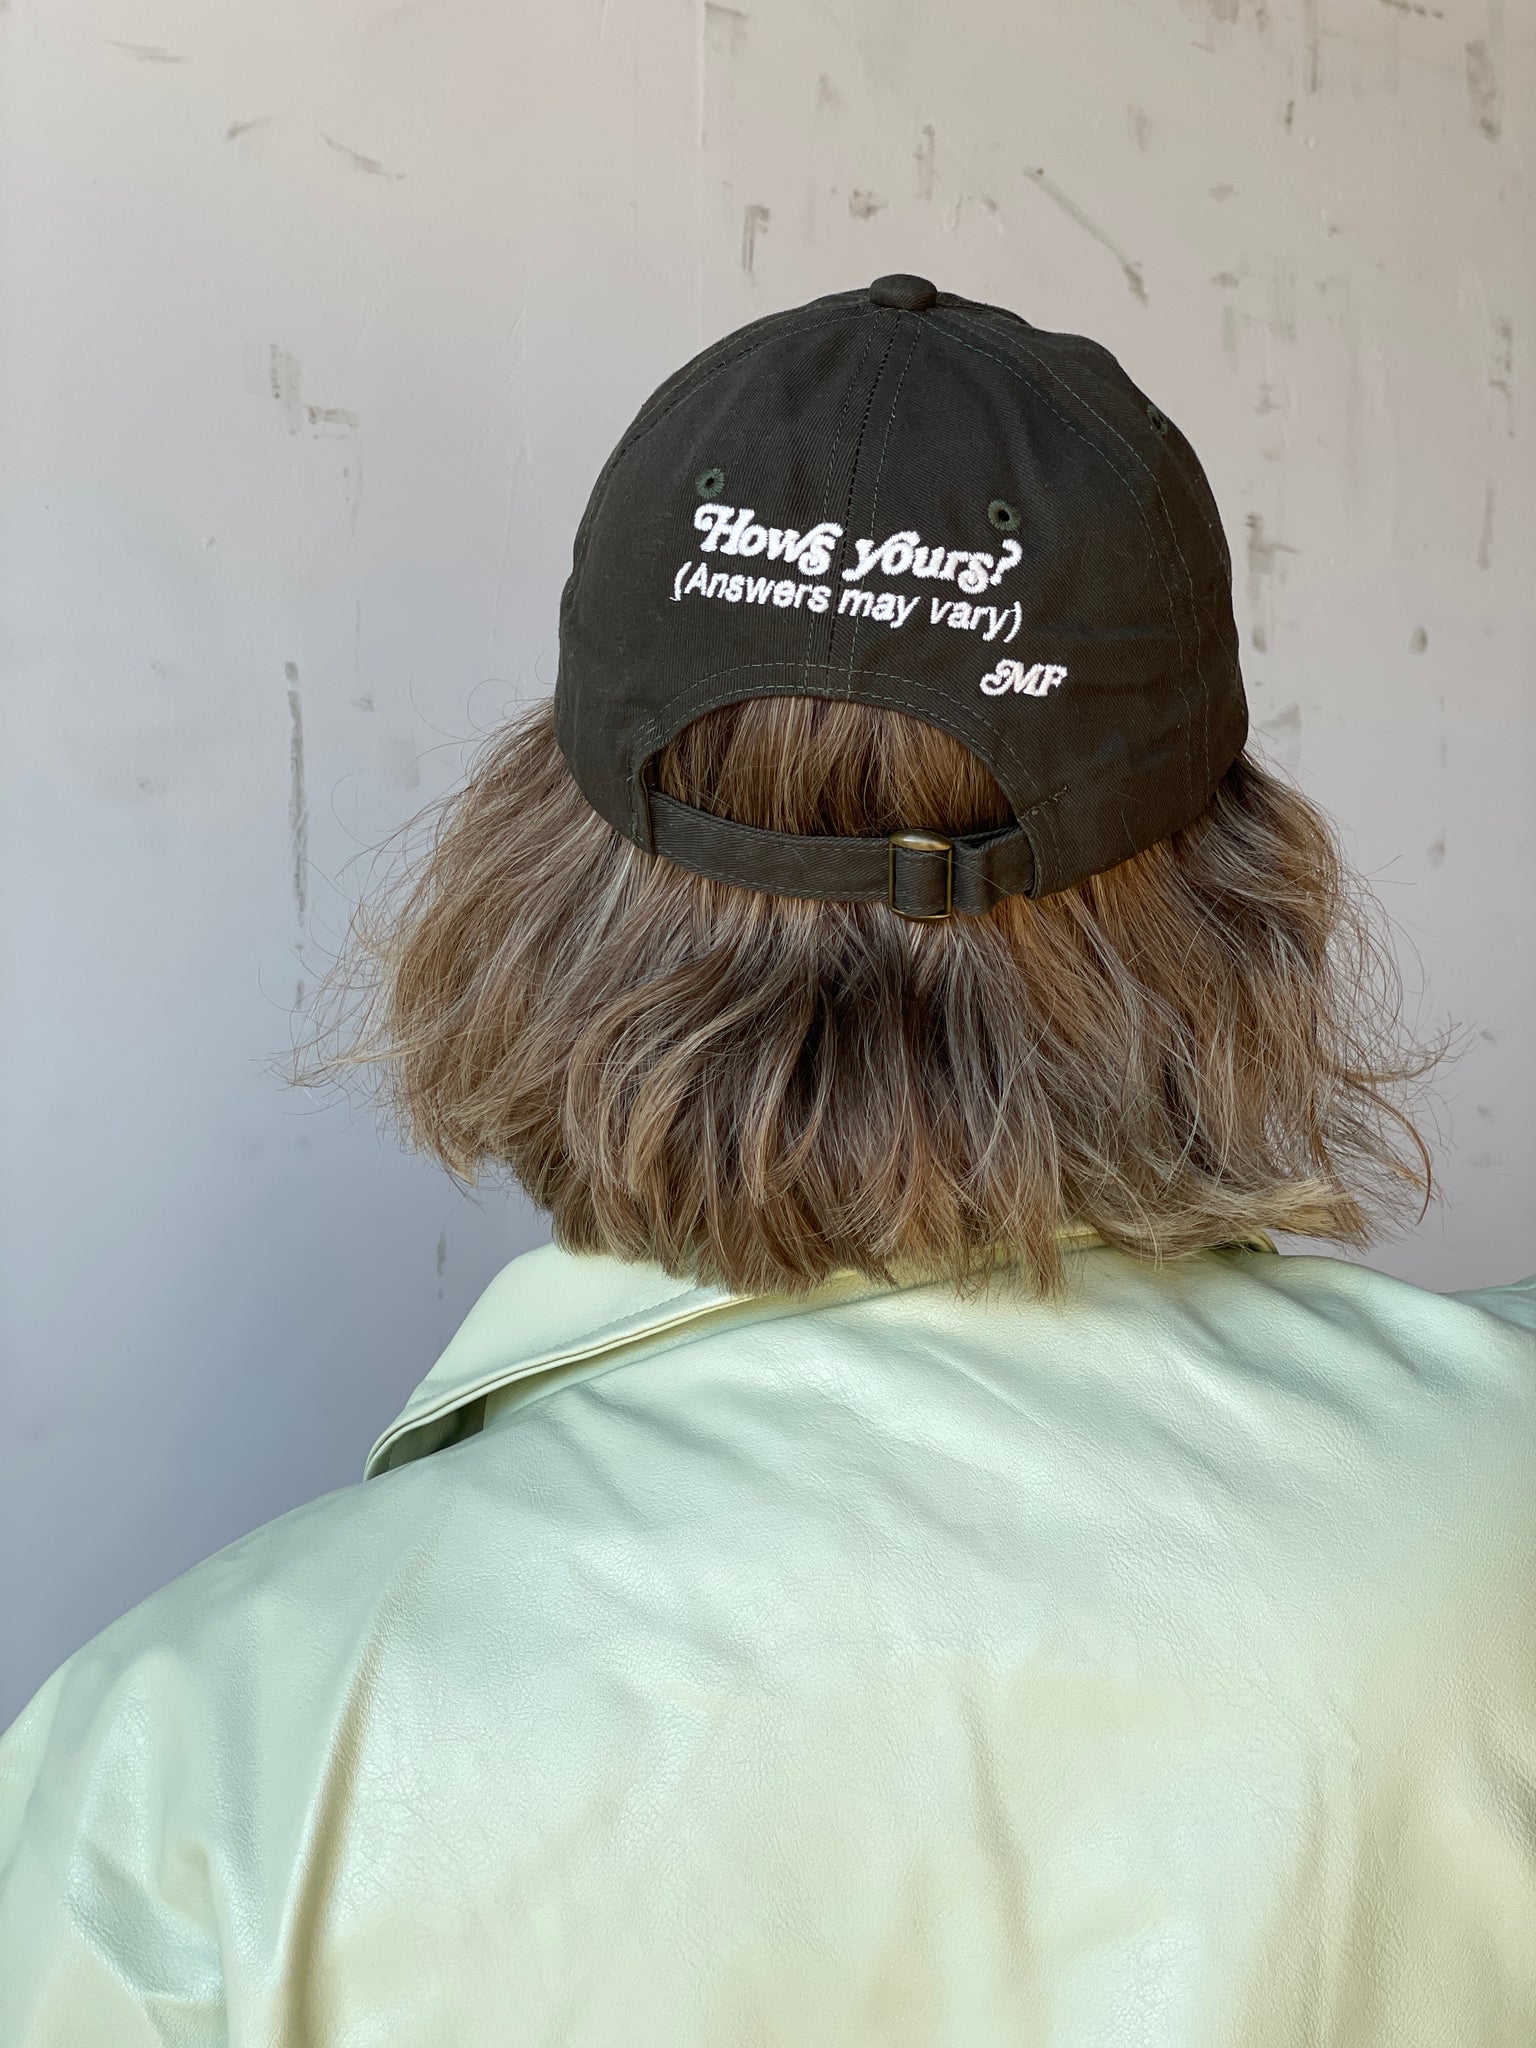 The Mental Health Hat